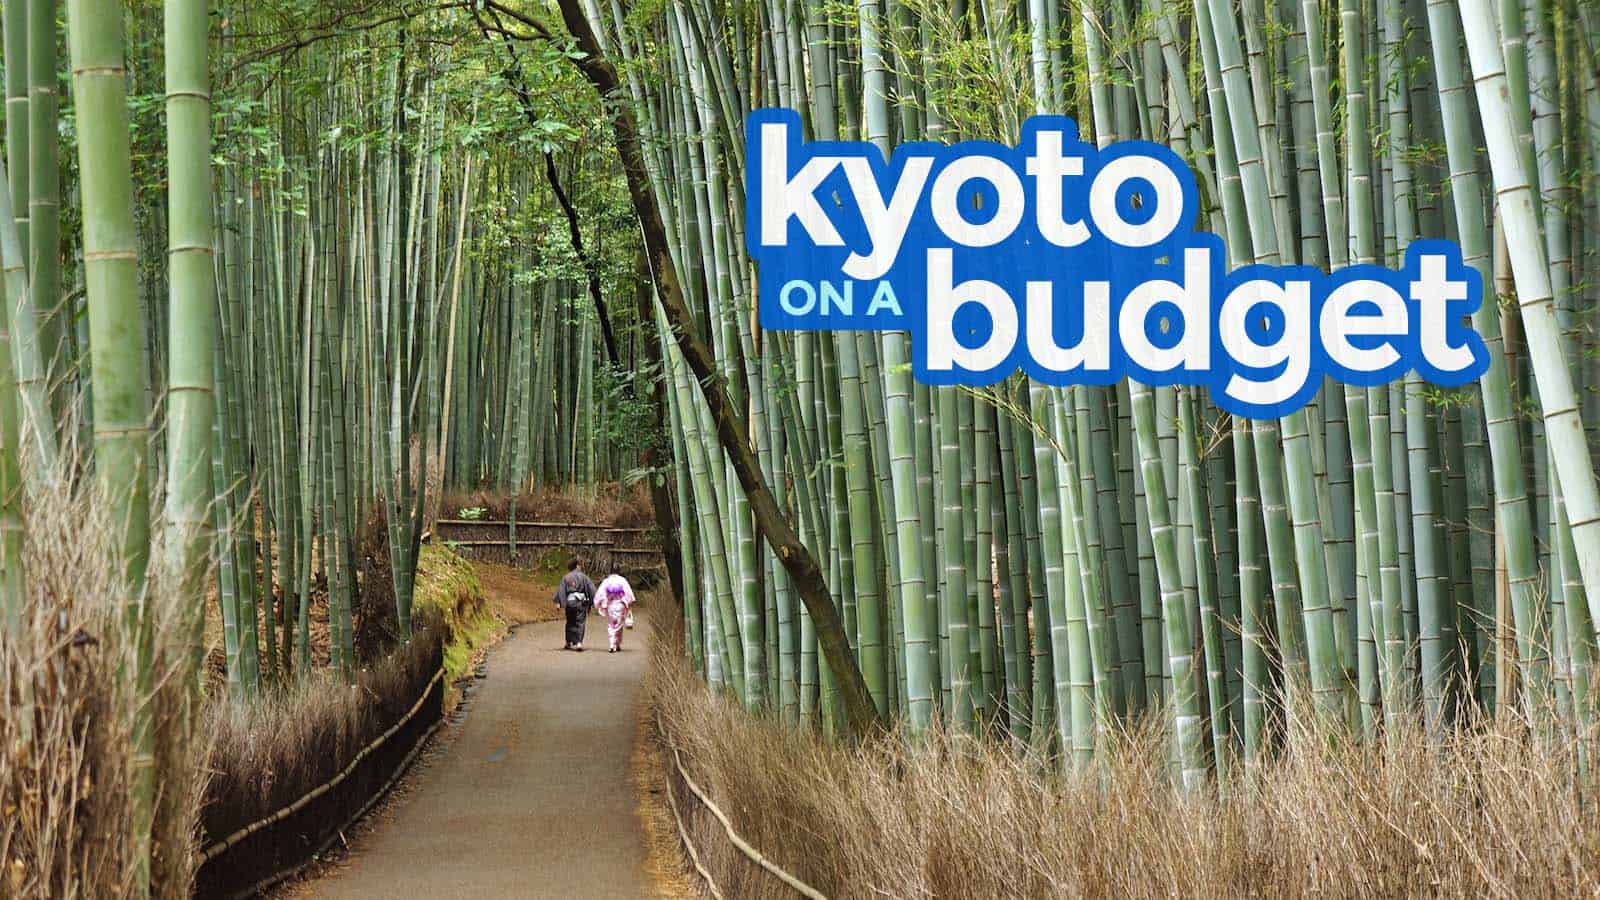 KYOTO TRAVEL GUIDE: Budget Itinerary, Things to Do